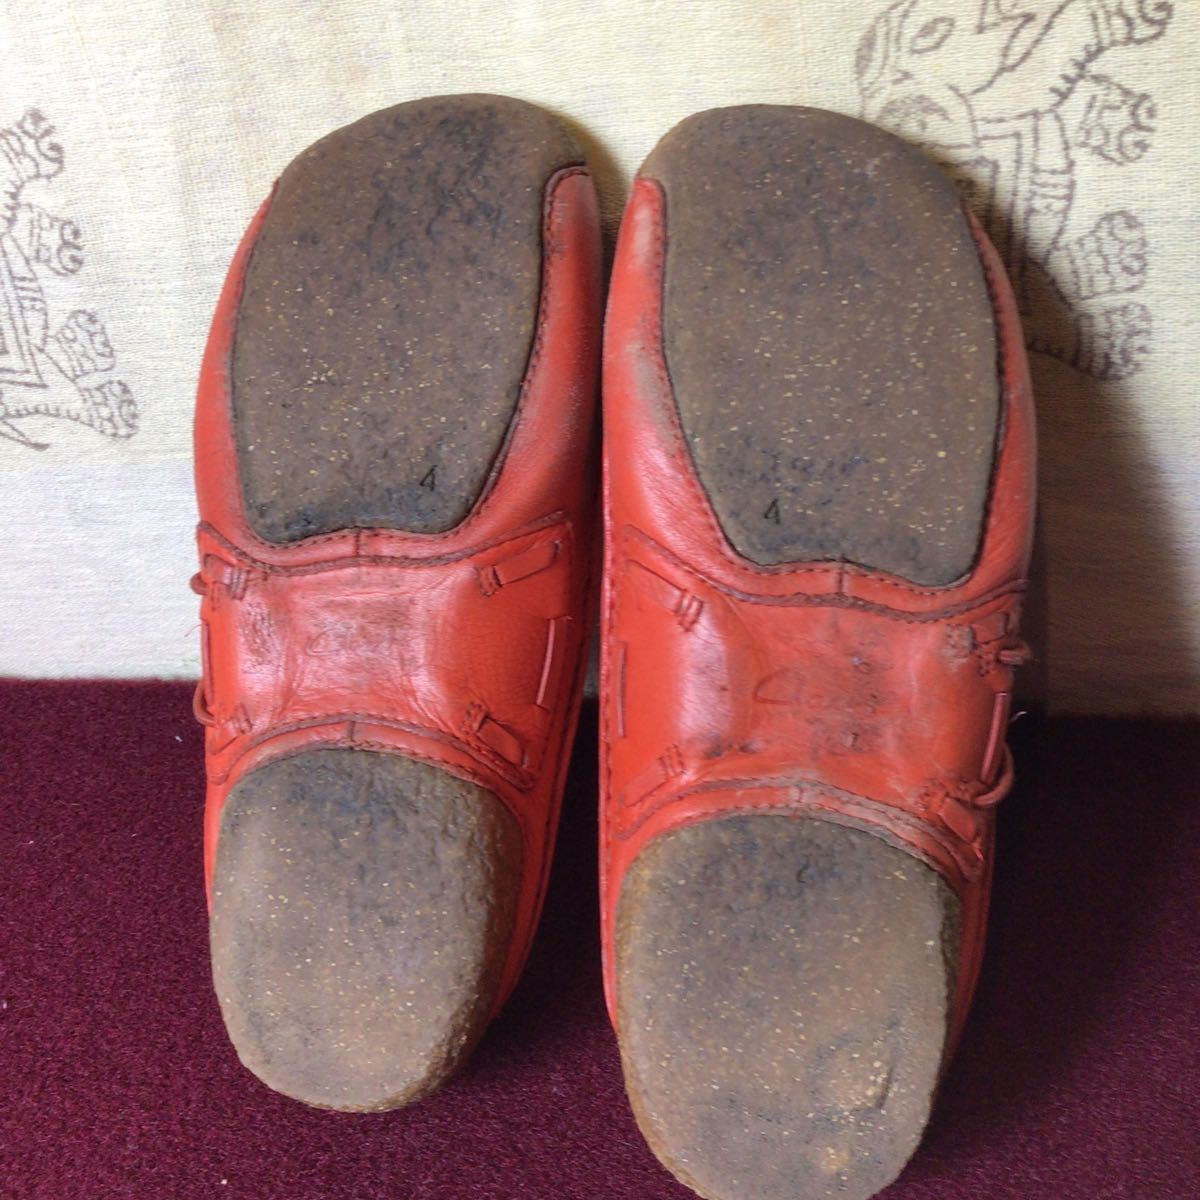 [ selling out! free shipping!]A-94Clarks!4!23.0cm! leather! orange! Loafer! slip-on shoes! casual shoes! used!